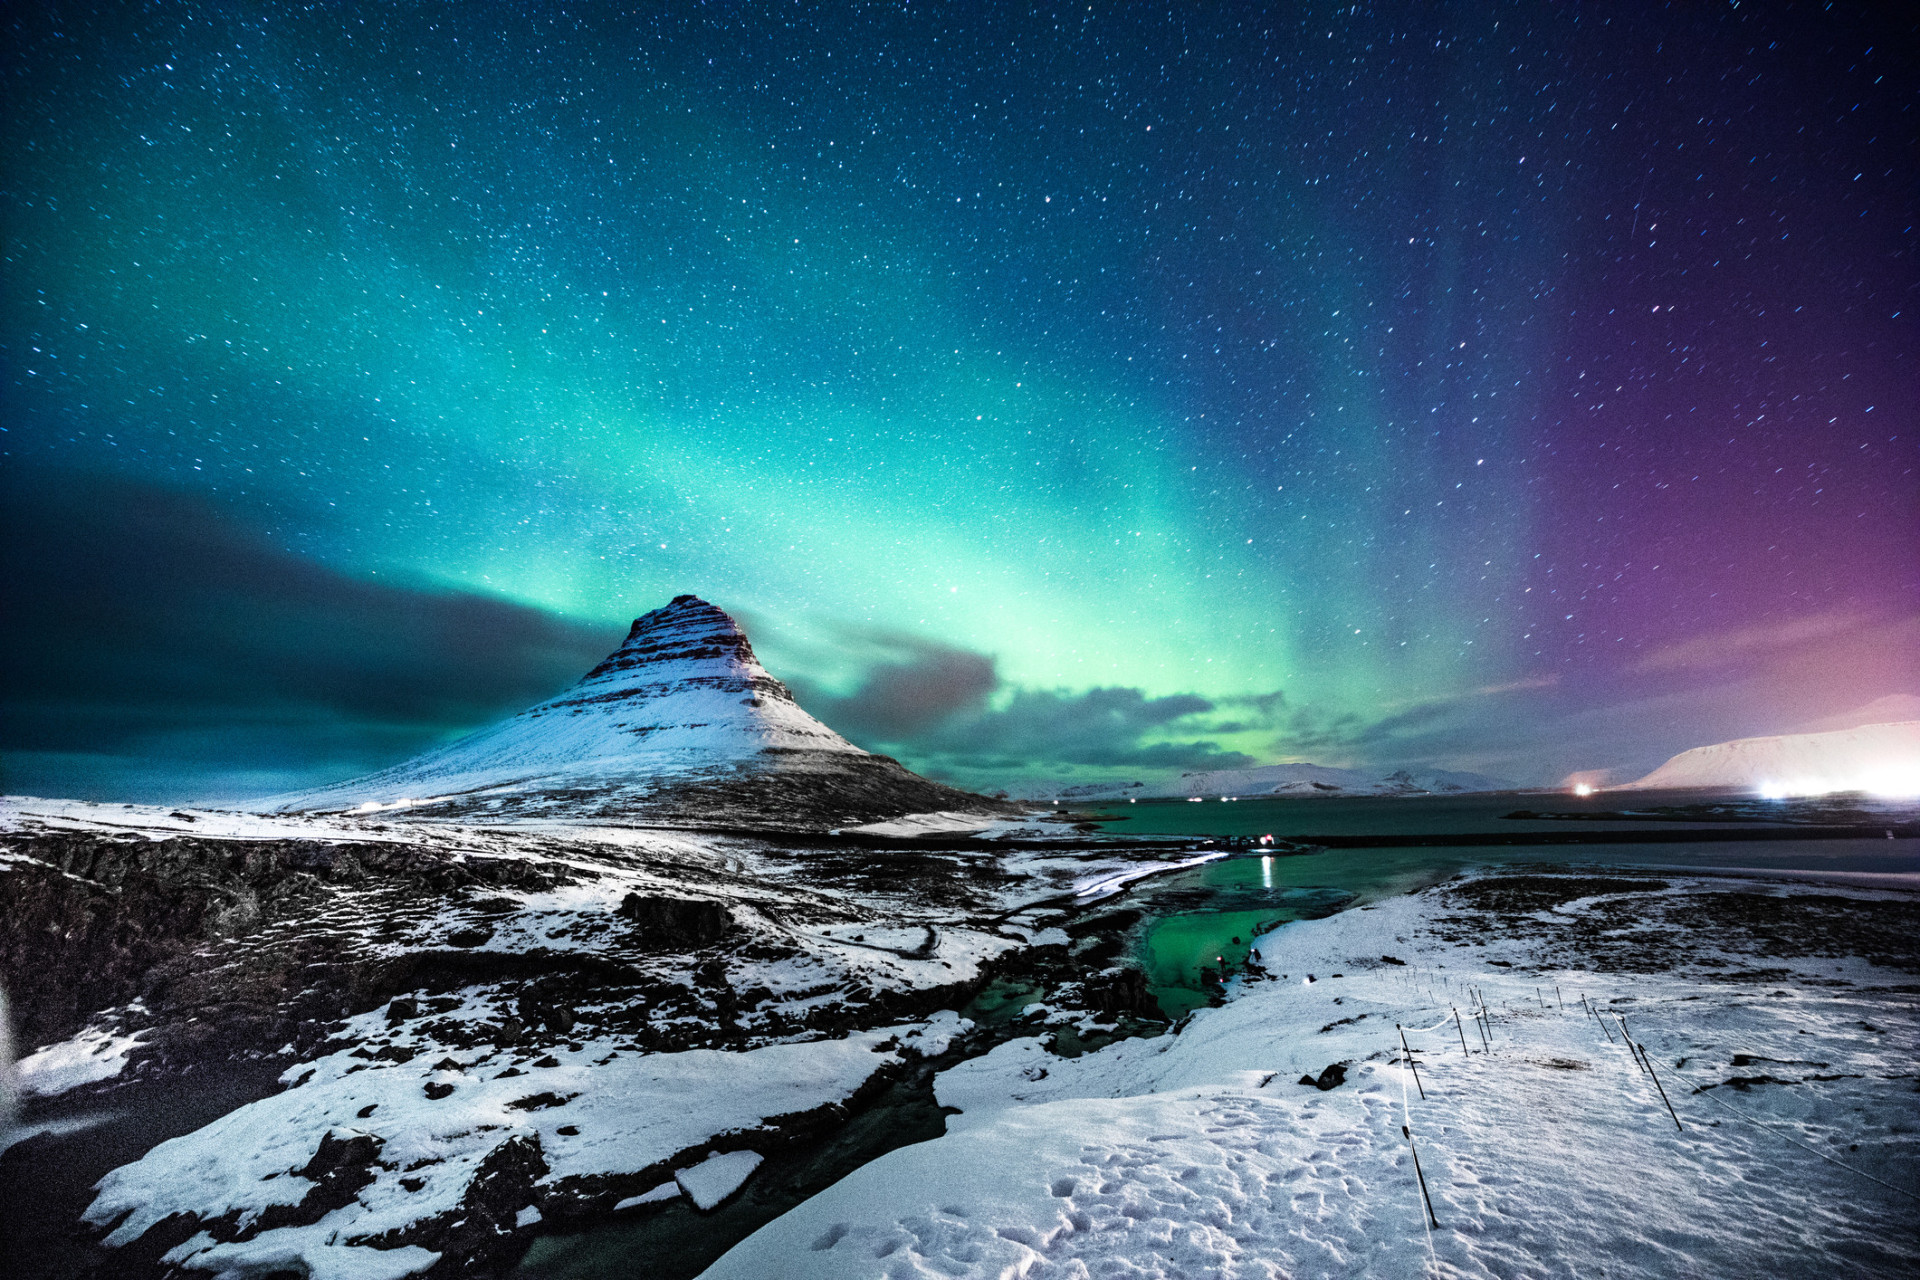 The Land of Fire and Ice is the perfect place to explore on your own. Apart from the jaw-dropping landscapes, tourism services in Iceland are top notch and everyone is fluent in English.<p><a href="https://www.msn.com/en-us/community/channel/vid-7xx8mnucu55yw63we9va2gwr7uihbxwc68fxqp25x6tg4ftibpra?cvid=94631541bc0f4f89bfd59158d696ad7e">Follow us and access great exclusive content every day</a></p>